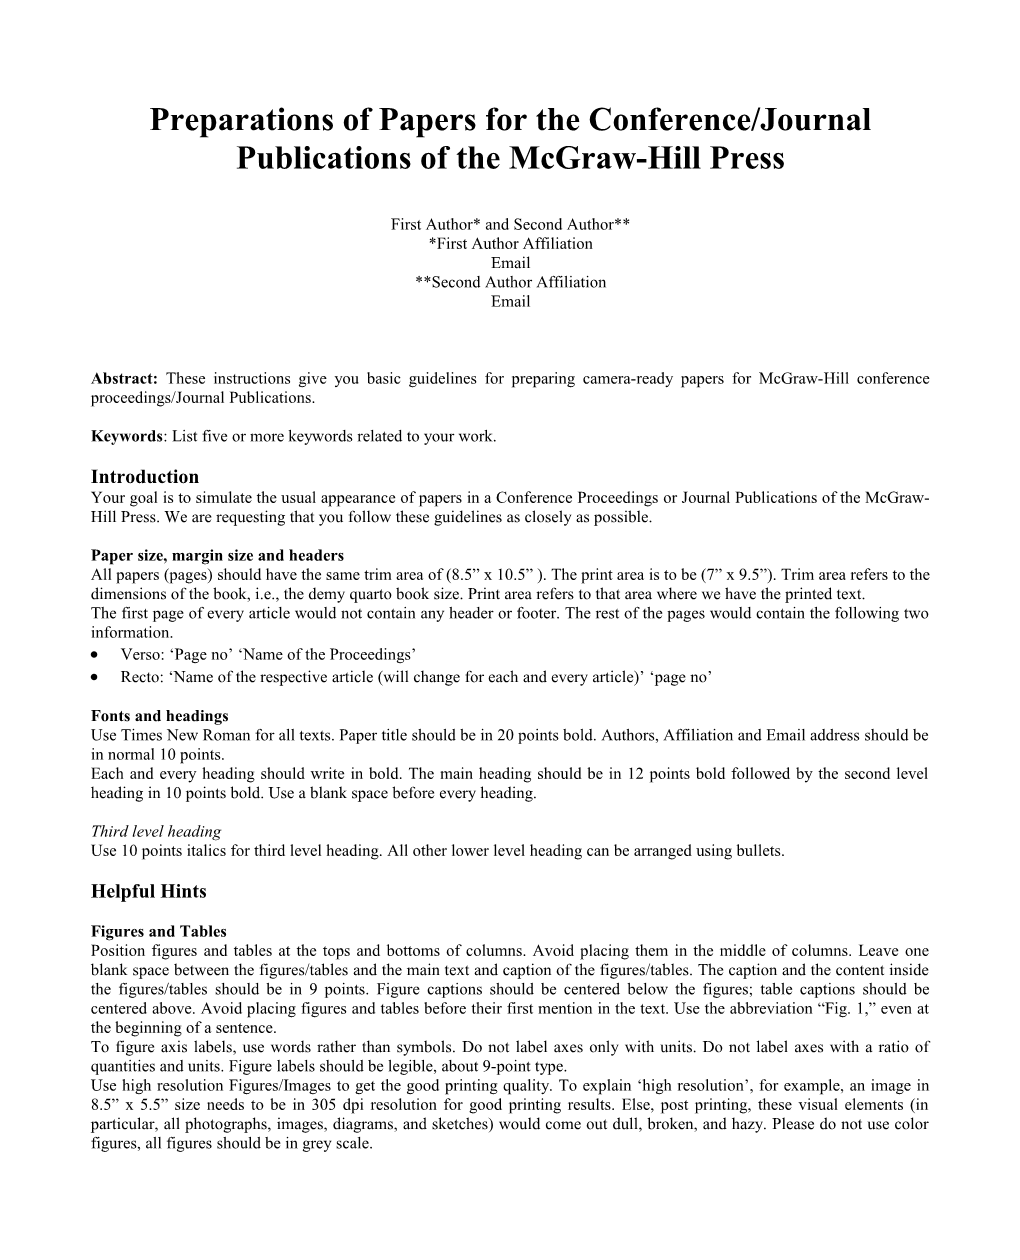 Preparations of Papers for the Conference/Journal Publications of the Mcgraw-Hill Press